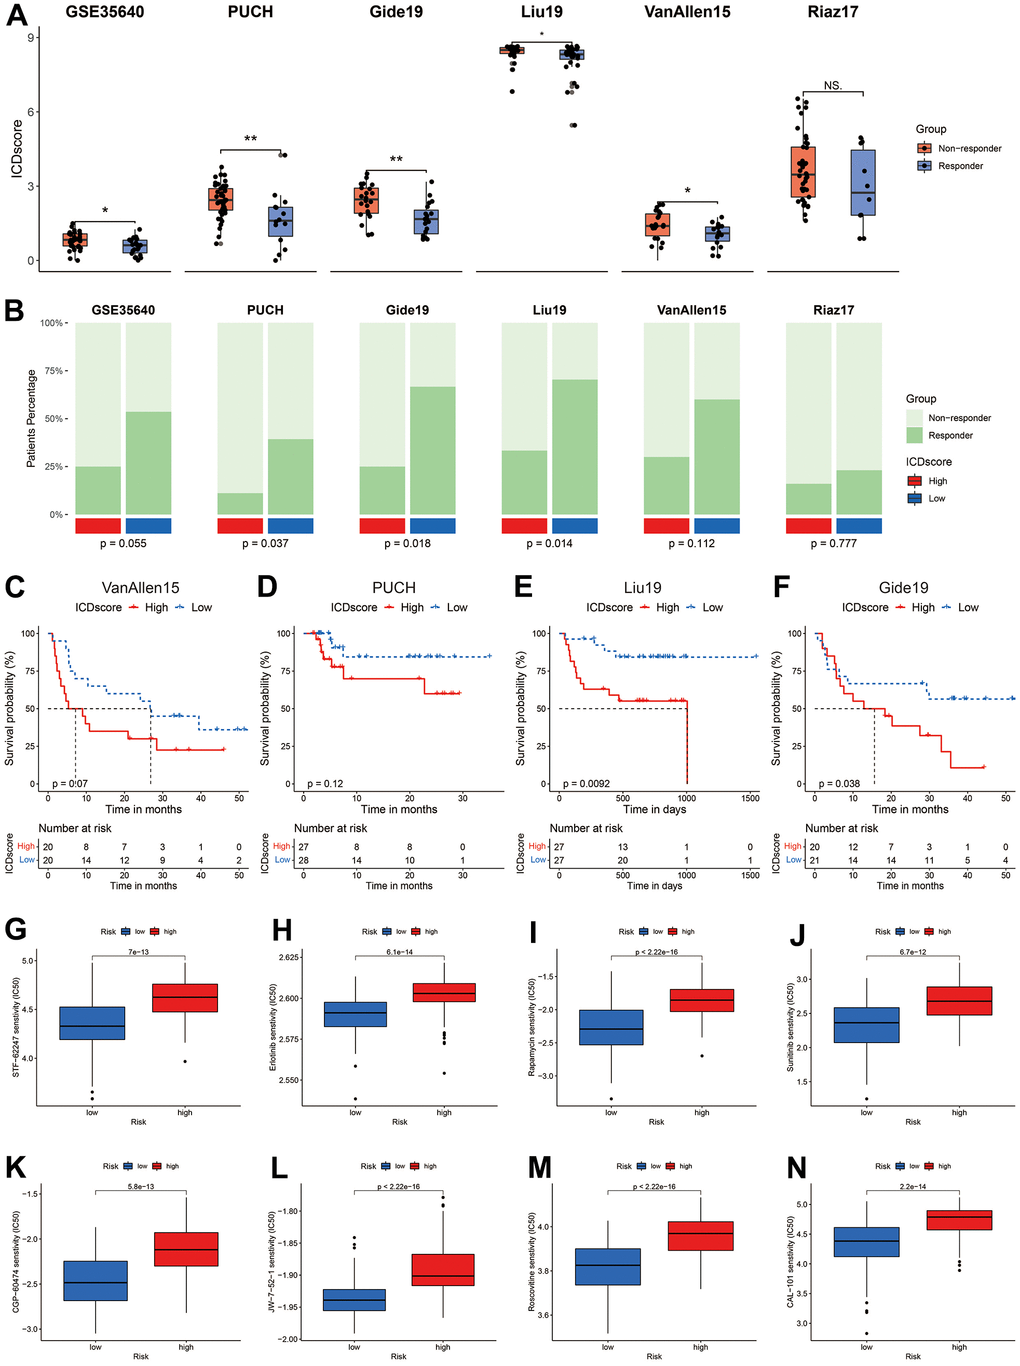 Sensitivity evaluation to anti-cancer therapy. (A) ICDscore of melanoma patients receiving immunotherapy in GSE35640, PUCH, Gide19, Liu19, VanAllen16, and Riaz17 cohorts. (B) Ratio of patients responding or not responding to immunotherapy in ICDscore-high and ICDscore-low subgroups of GSE35640, PUCH, Gide19, Liu19, VanAllen16, and Riaz17 cohorts. (C–F) Kaplan–Meier curves of OS in melanoma patients from ICDscore-high and ICDscore-low subgroups of VanAllen15 (C), PUCH (D), Liu19 (E), and Gide19 (G) cohorts. (G–N) Box plot showing a difference in the IC50 values of STF-62247 (G), Erlotinib (H), Rapamycin (I), Sunitinib (J), CGP-60474 (K), JW-7-52-1 (L), Roscovitine (M), CAL-101 (N) between ICDscore-high and ICDscore-low melanoma patients. Ns, not significant; *p 